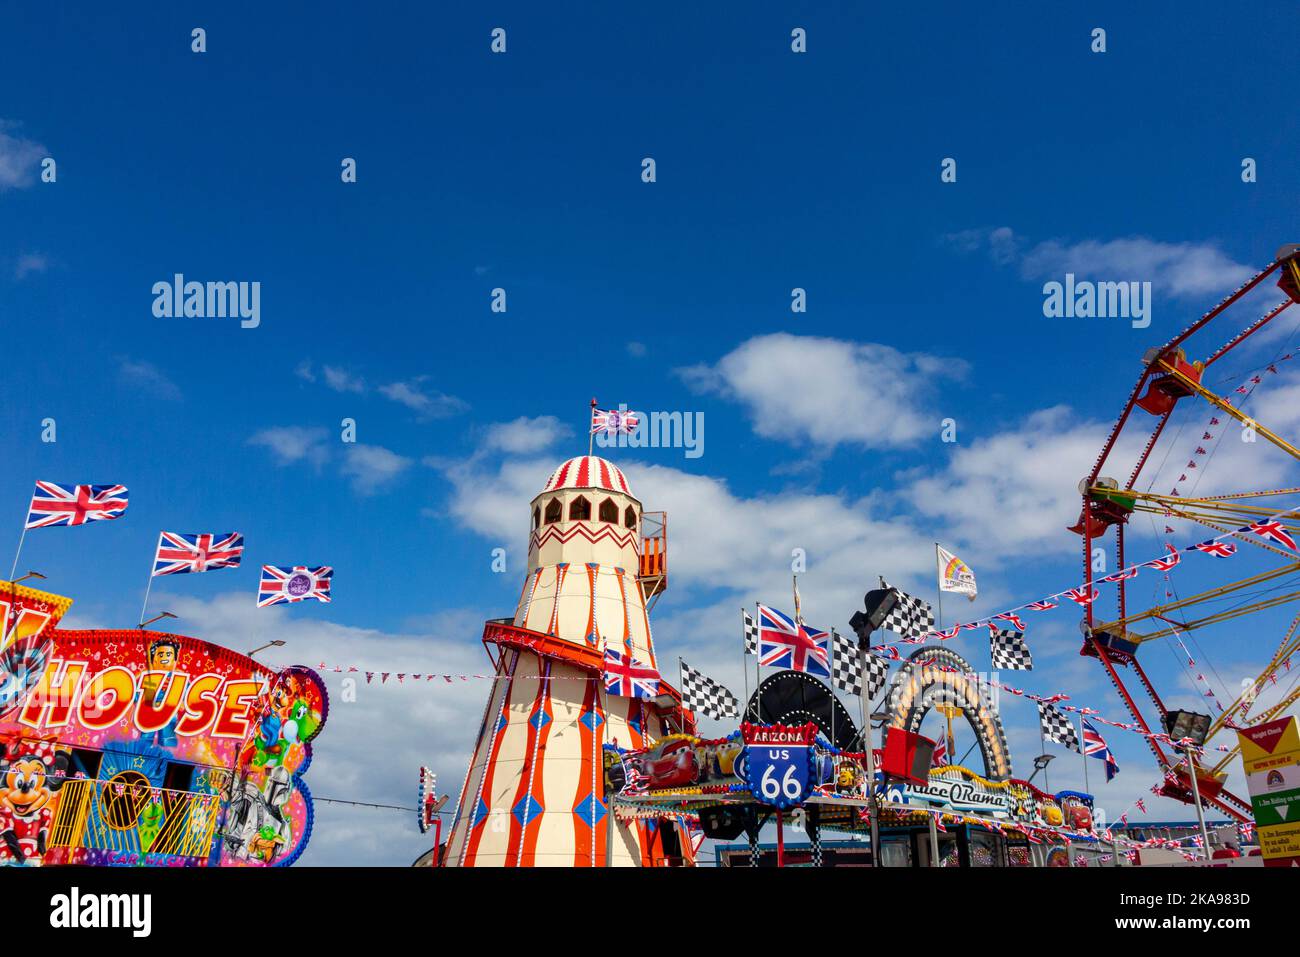 Traditional funfair rides at a fairground near Hunstanton beach in west Norfolk on the east coast of England UK. Stock Photo